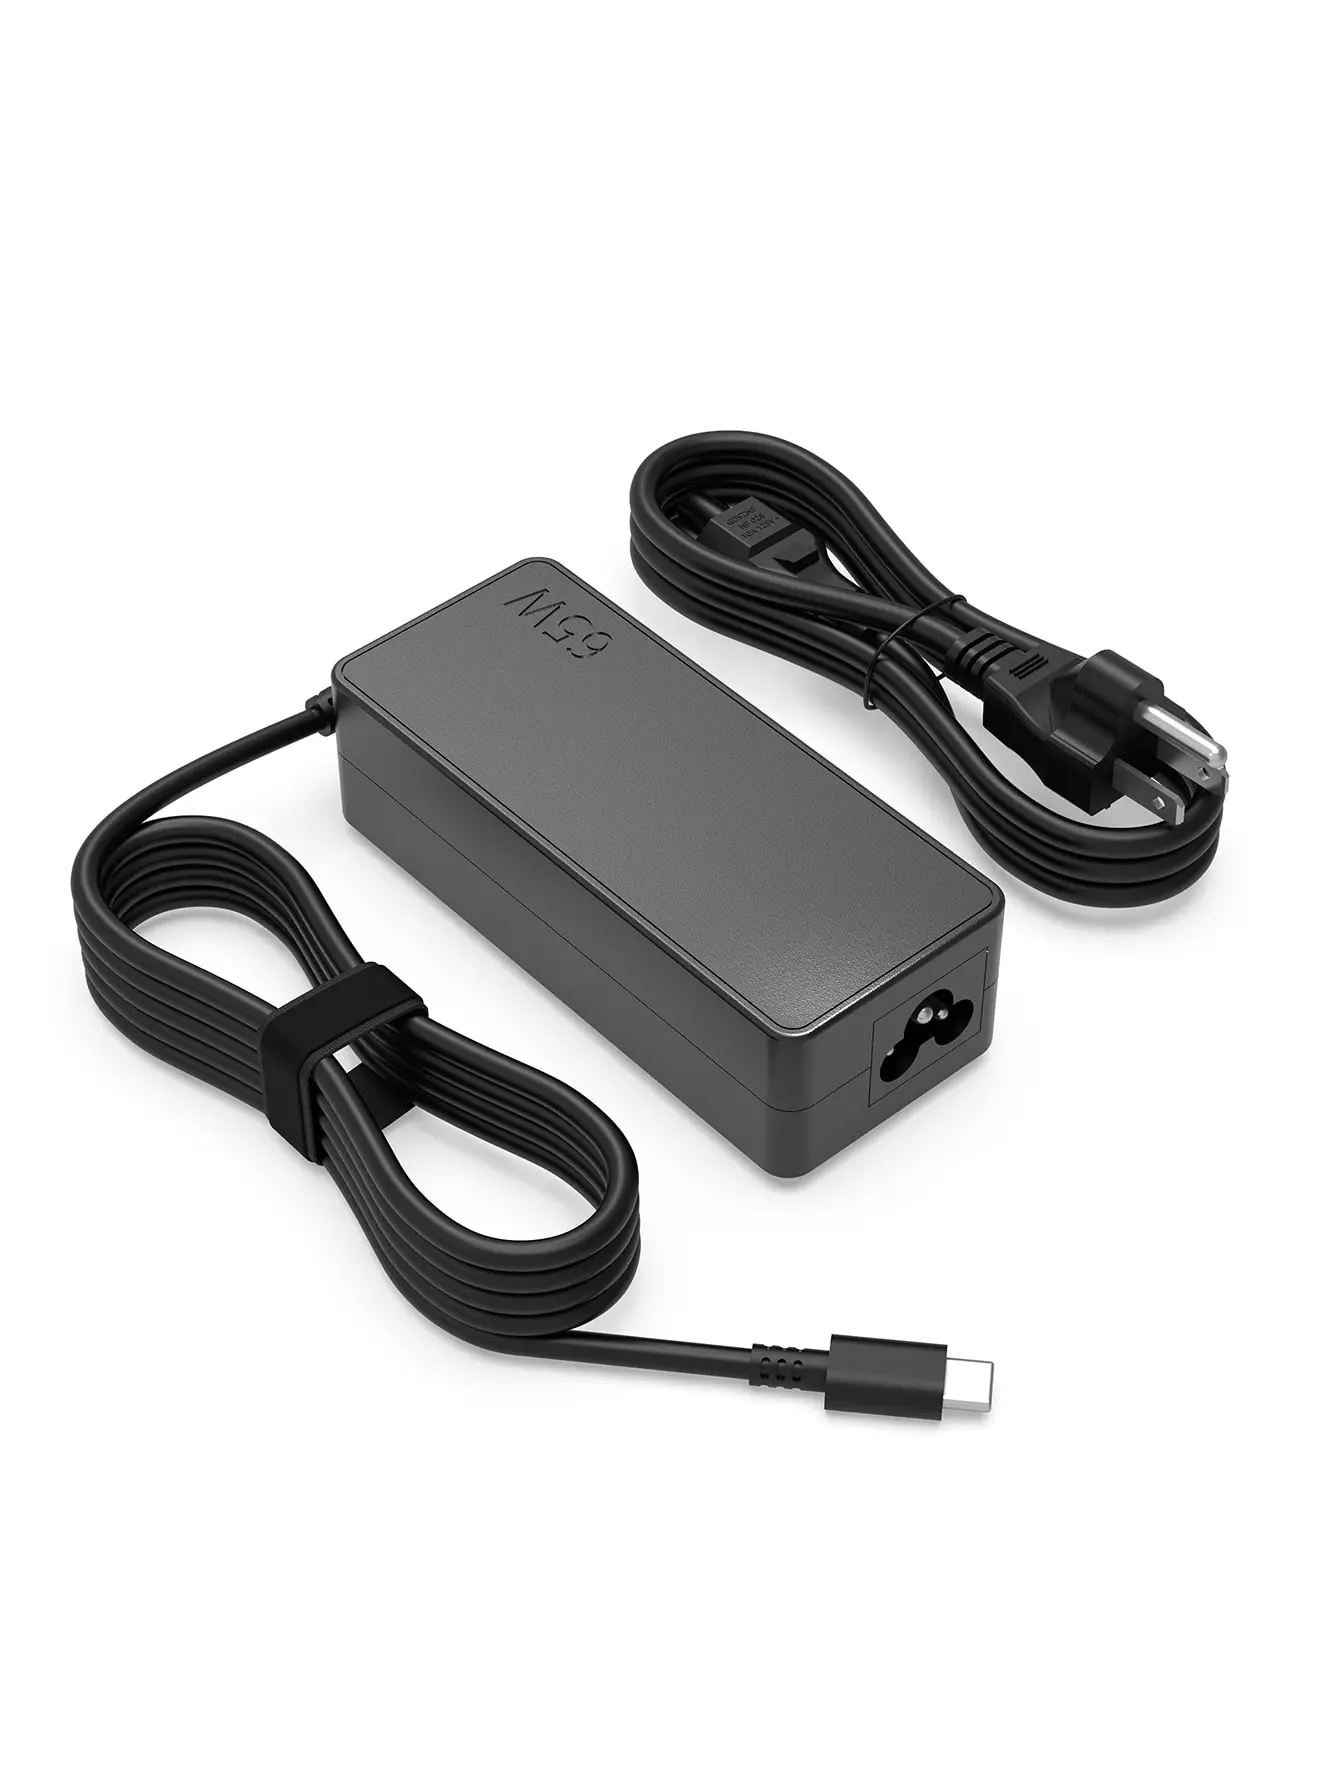 Reletech 65W USB C Laptop Charger Power Adapter for Lenovo ThinkPad,Hp,Chromebook,Yoga,Dell, ASUS,Acer Type C Fast Power Adapter